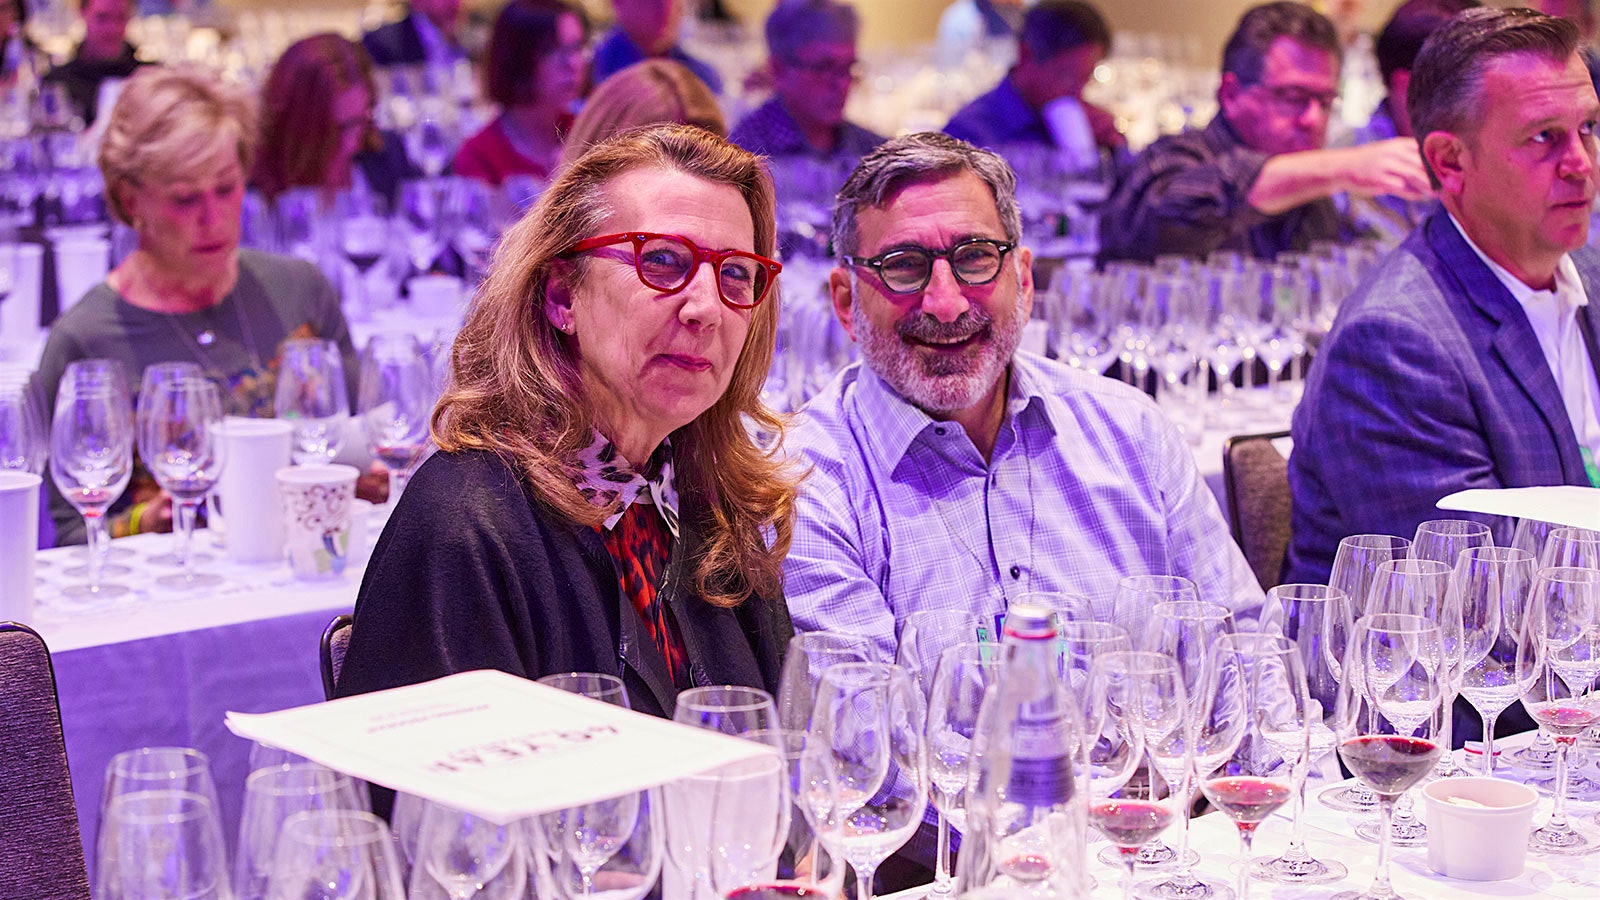  Winemaker Gina Gallo and cousin Joe Gallo in the Wine Experience audience for the reveal of Marvin R. Shanken's video interview with Ernest Gallo